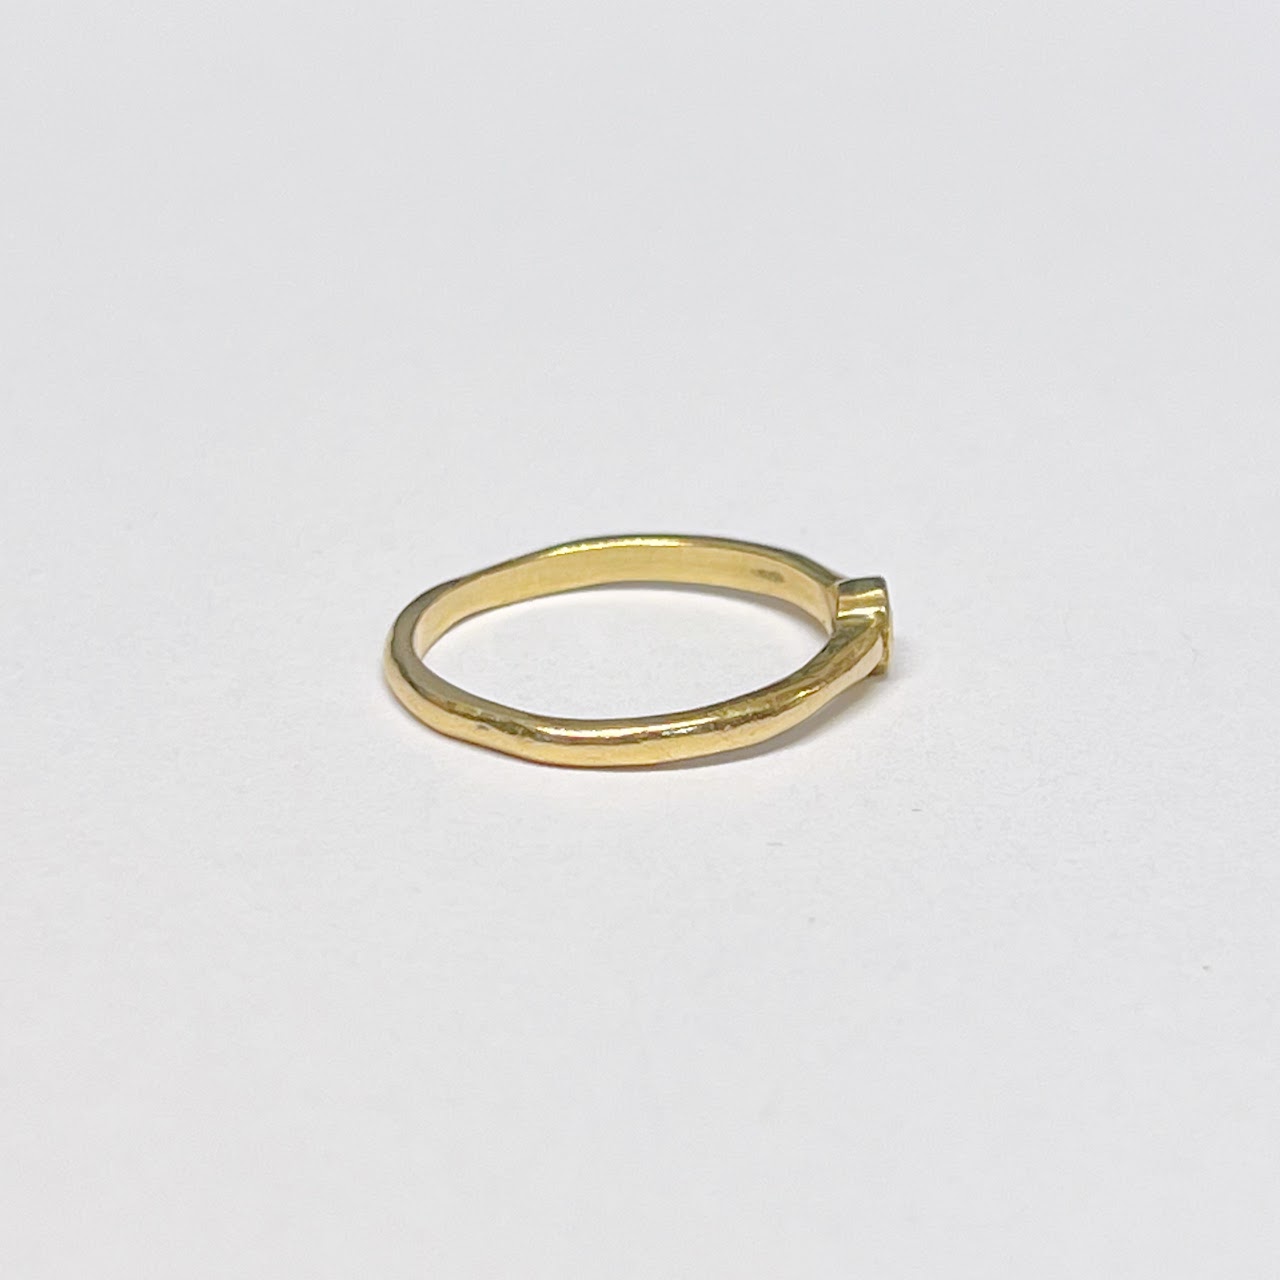 14K Gold Ring with Solitary Diamond